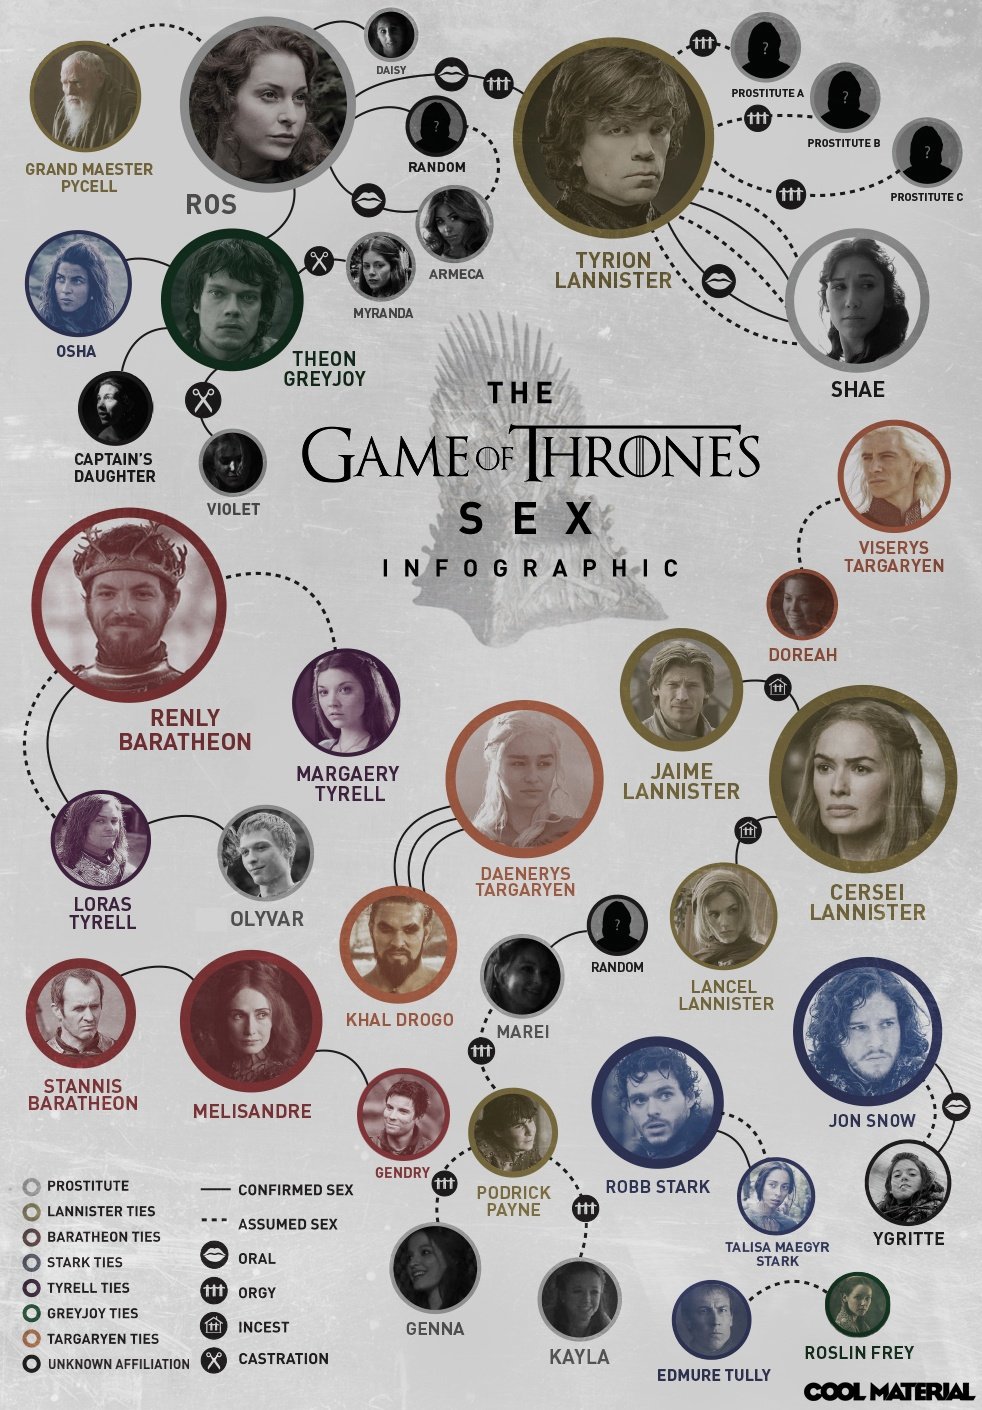 The Game of Thrones Sex Infographic